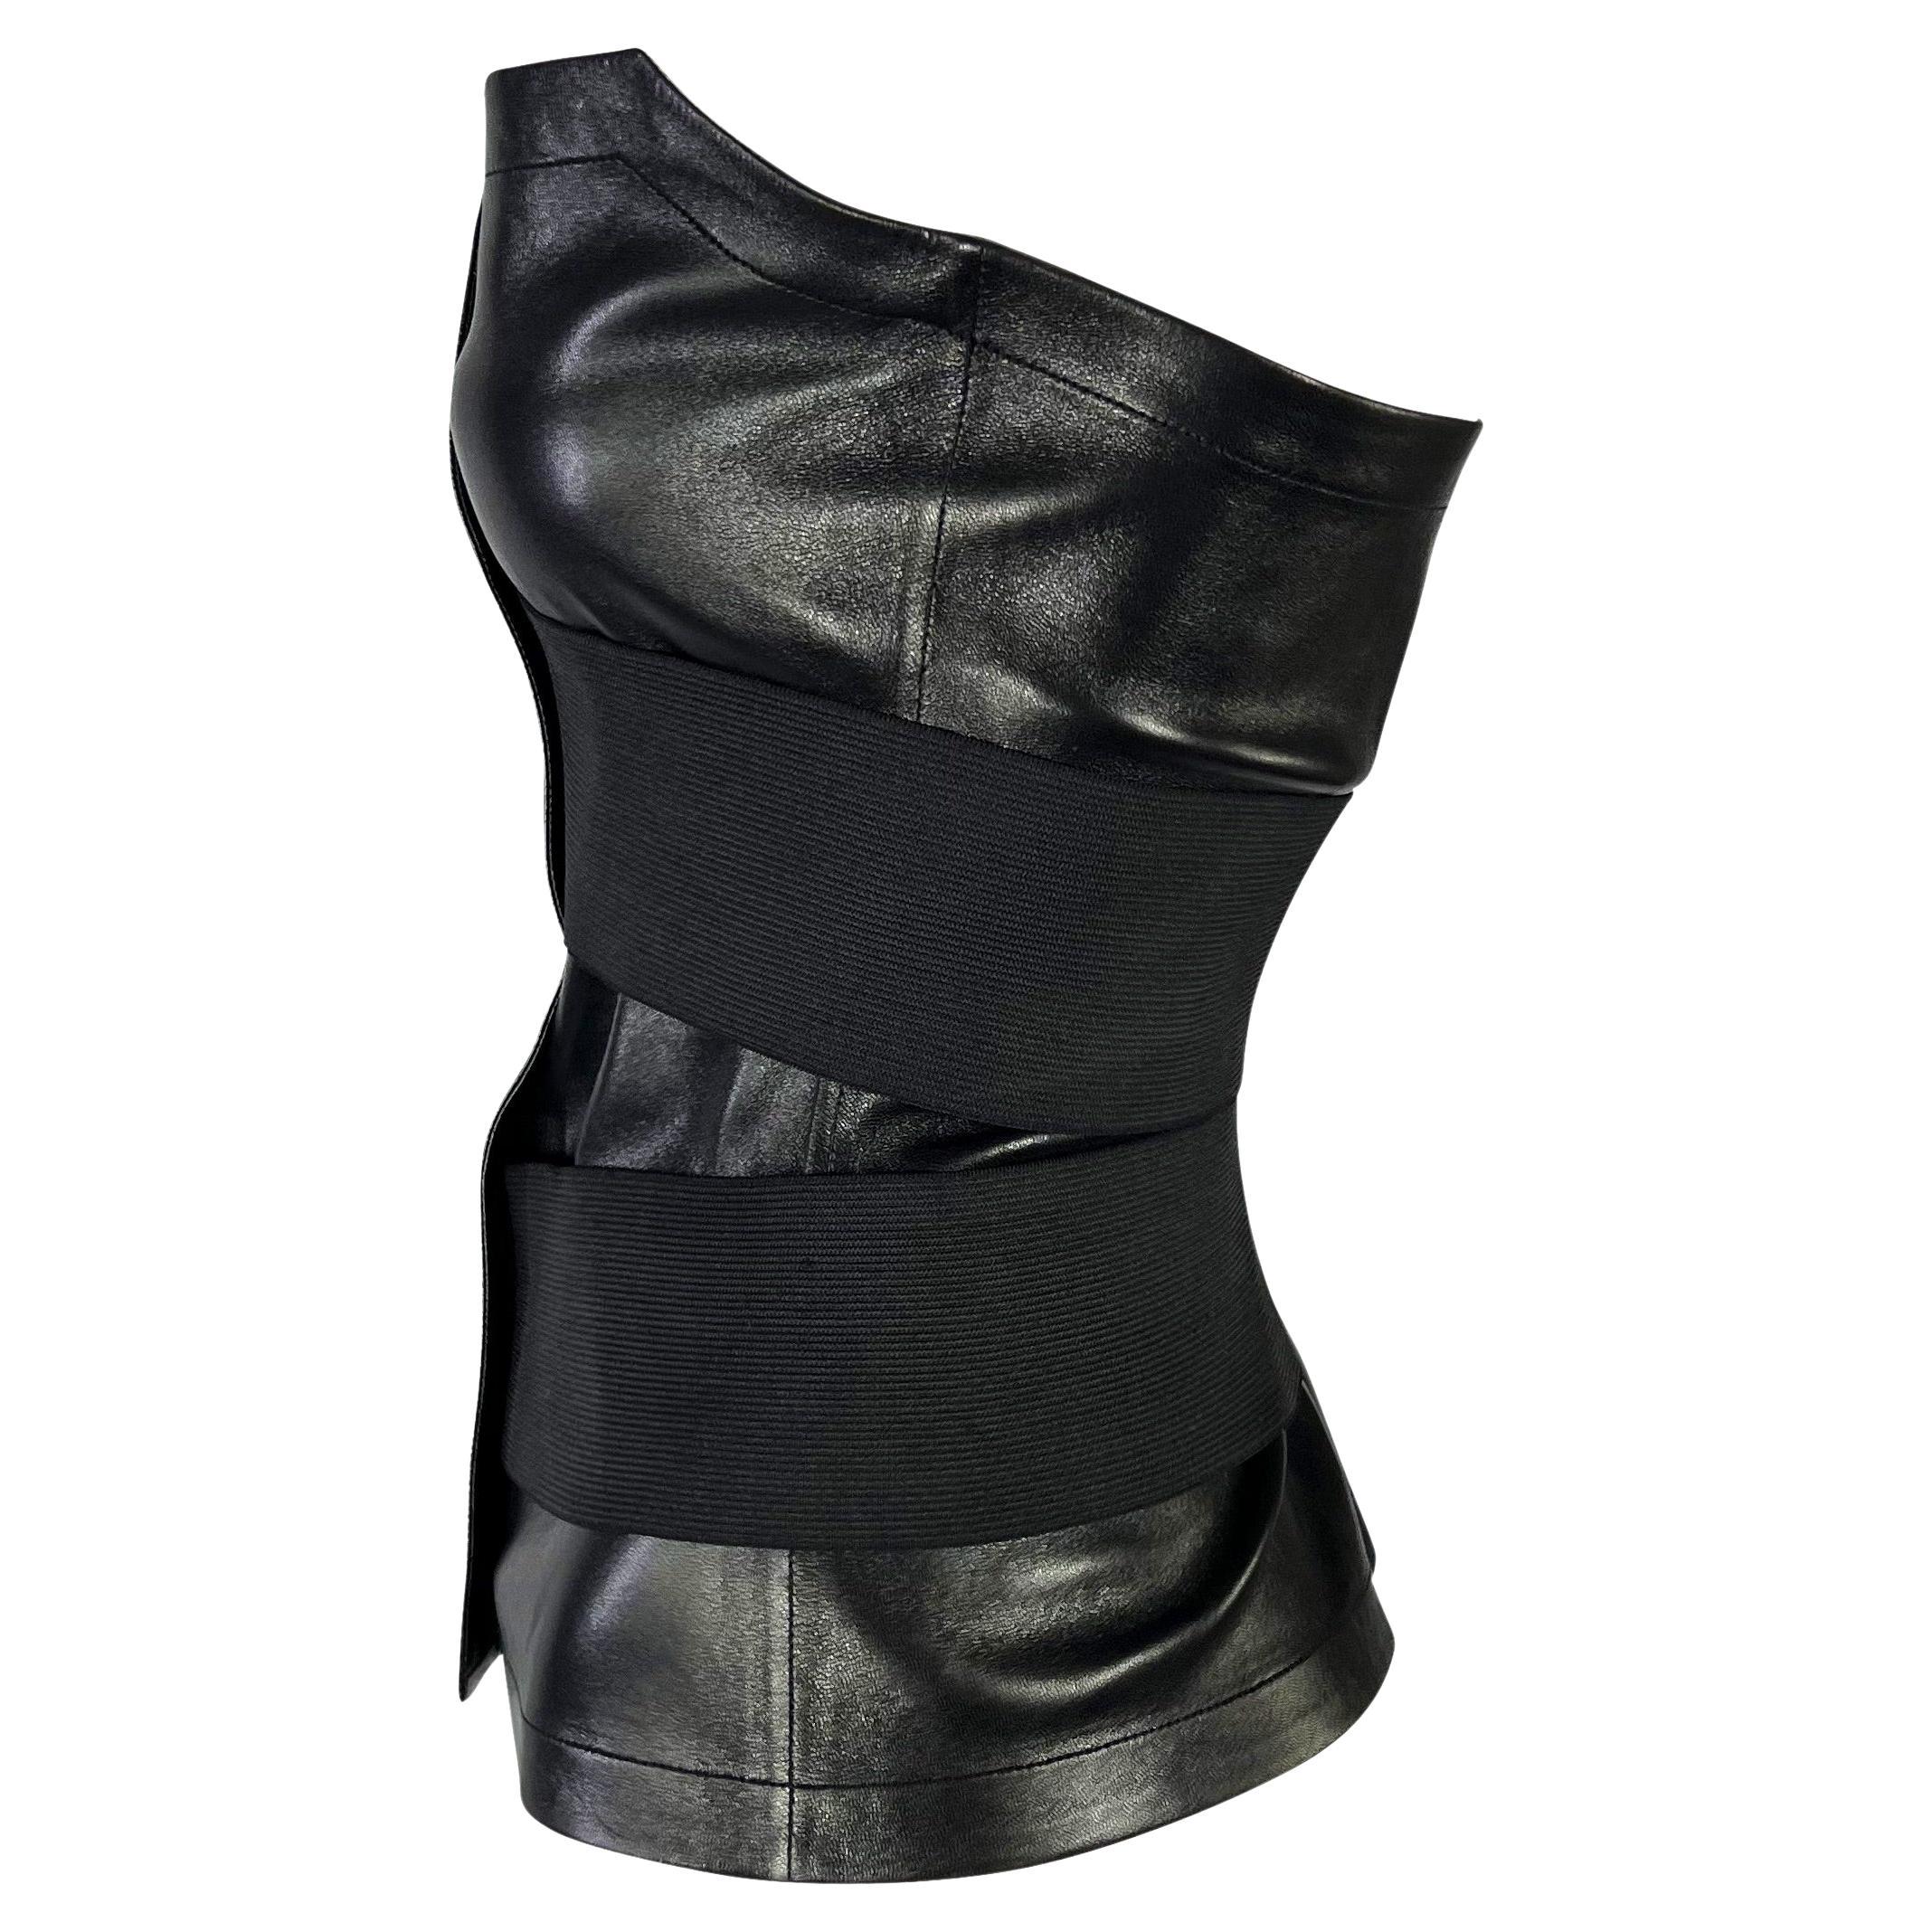 Presenting a stunning leather bandage strap Yves Saint Laurent Rive Gauche bustier top, designed by Tom Ford. From the Spring/Summer 2001 collection,  many similar strap designs debuted on the season's runway. This ultra sleek and sexy corset is